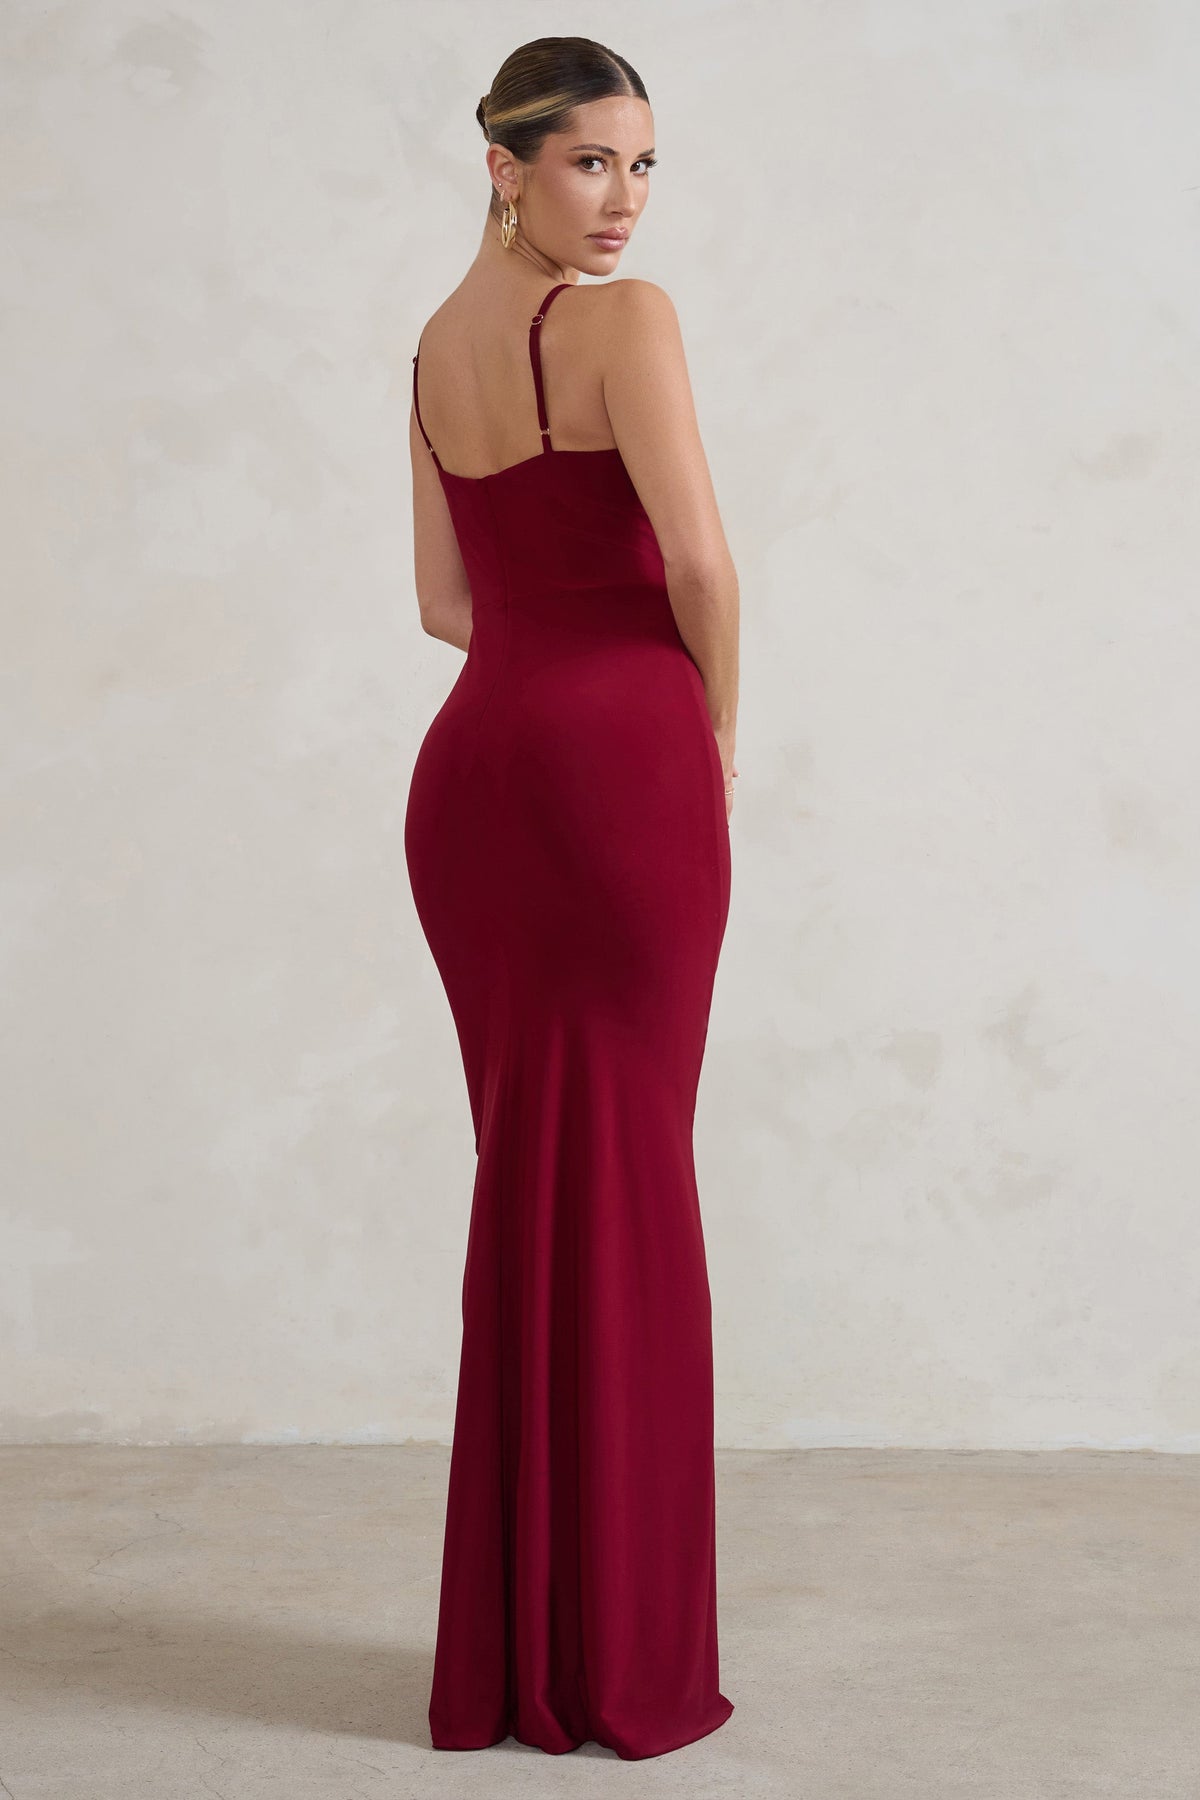 Red Maxi Dress - Bodycon Dress With Slit - Runched Dress